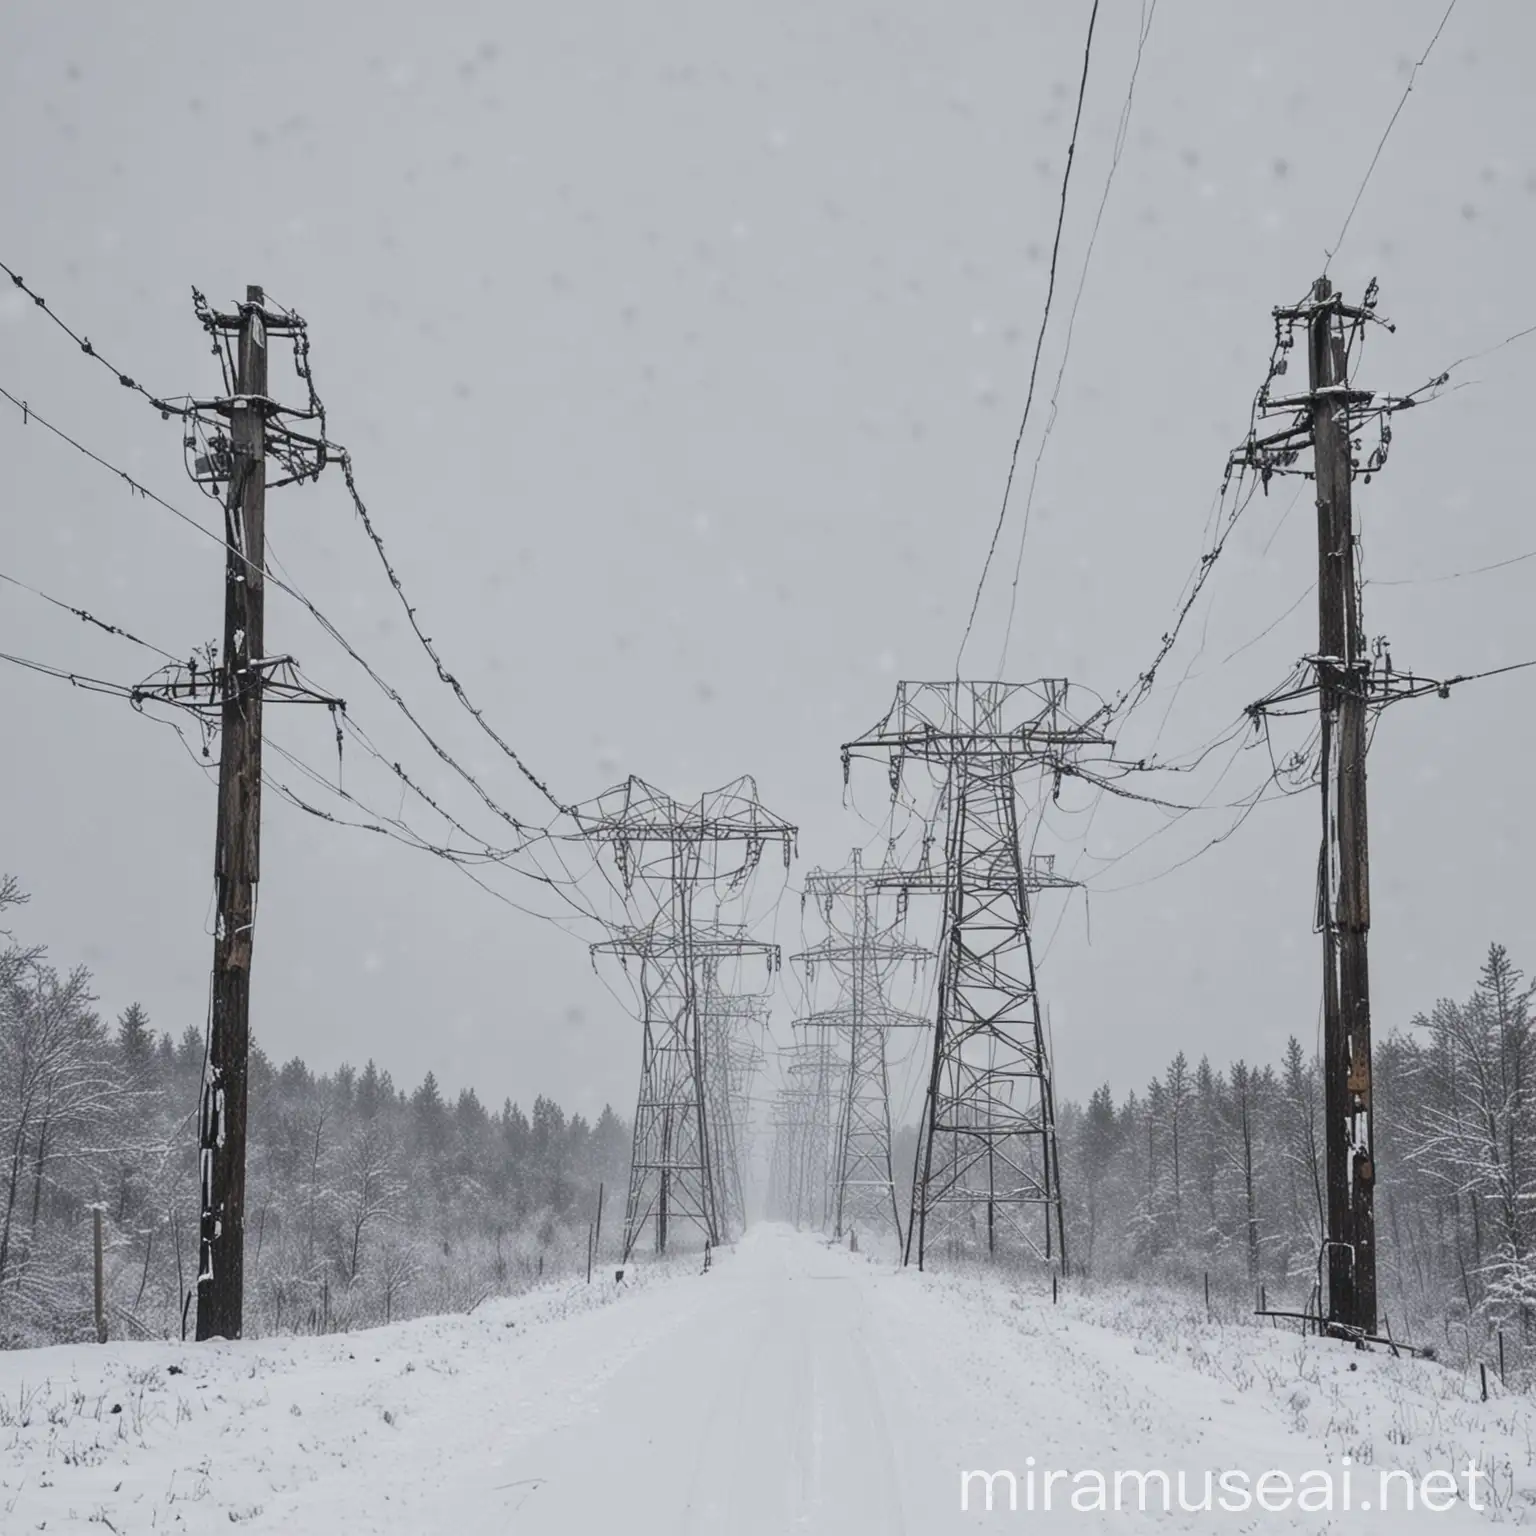 Snowy Conditions Transmission Line Insulators at Work